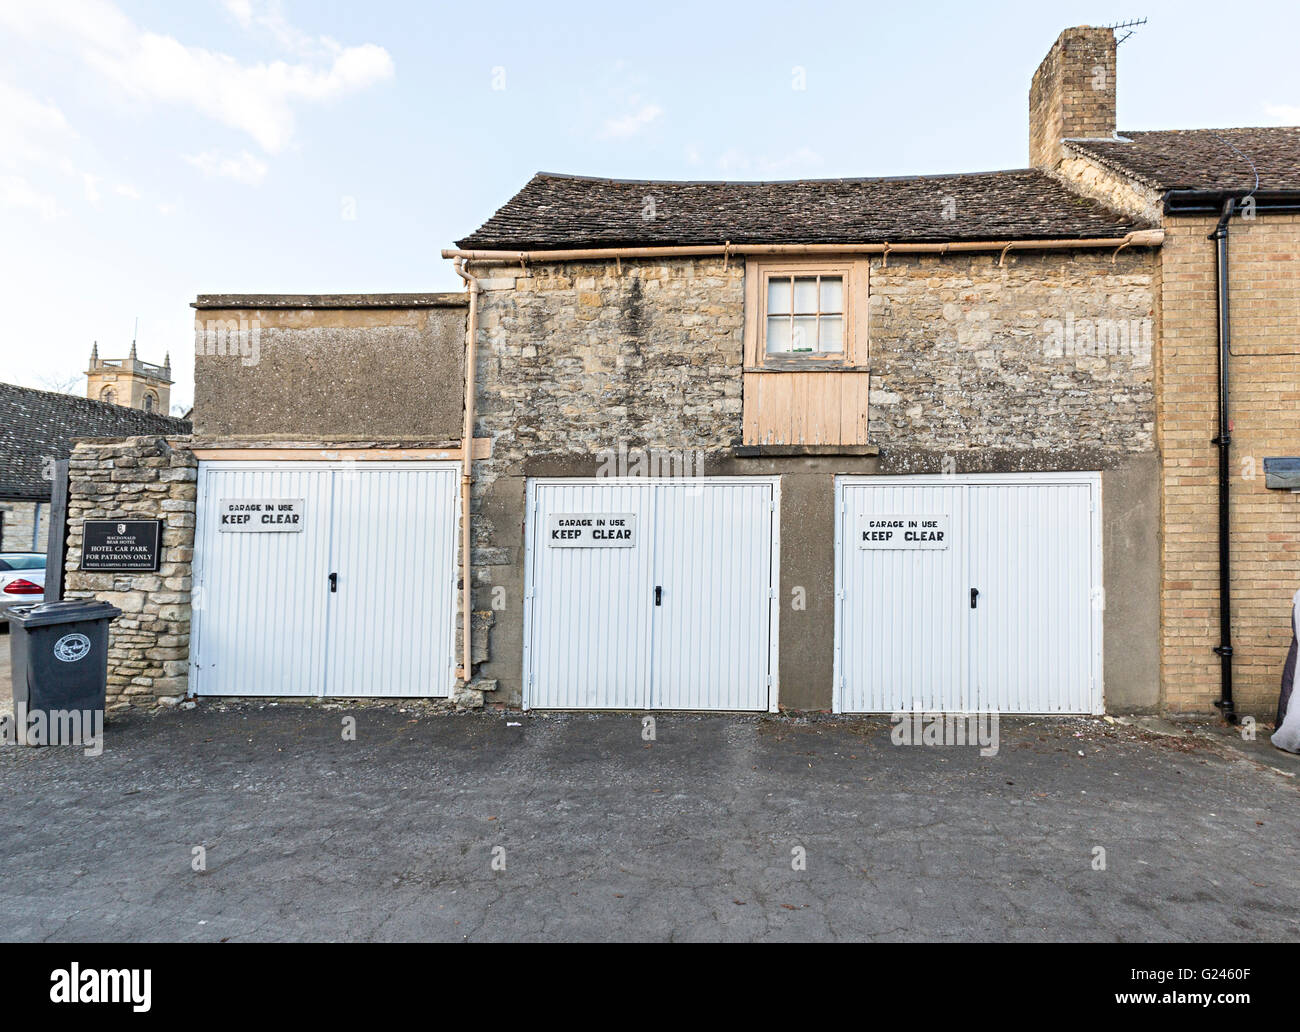 Three garages with keep clear signs, Woodstock, Oxfordshire, England, UK Stock Photo